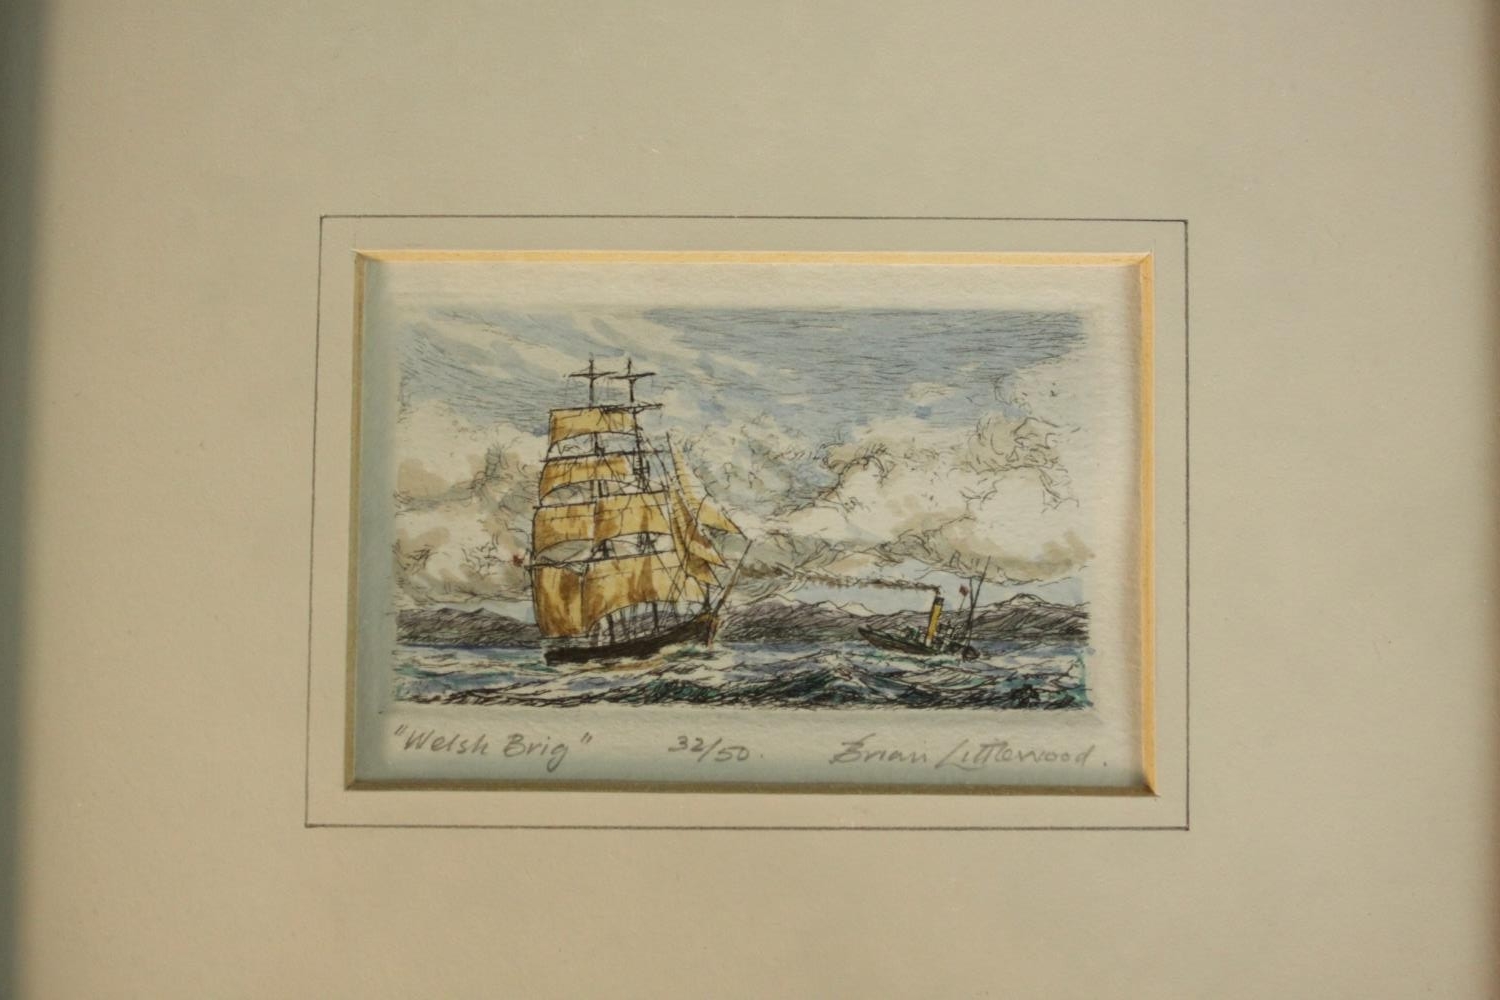 Brian Littlewood (1934-) two hand coloured limited edition etchings of boats (Pride of Baltimore and - Image 3 of 7